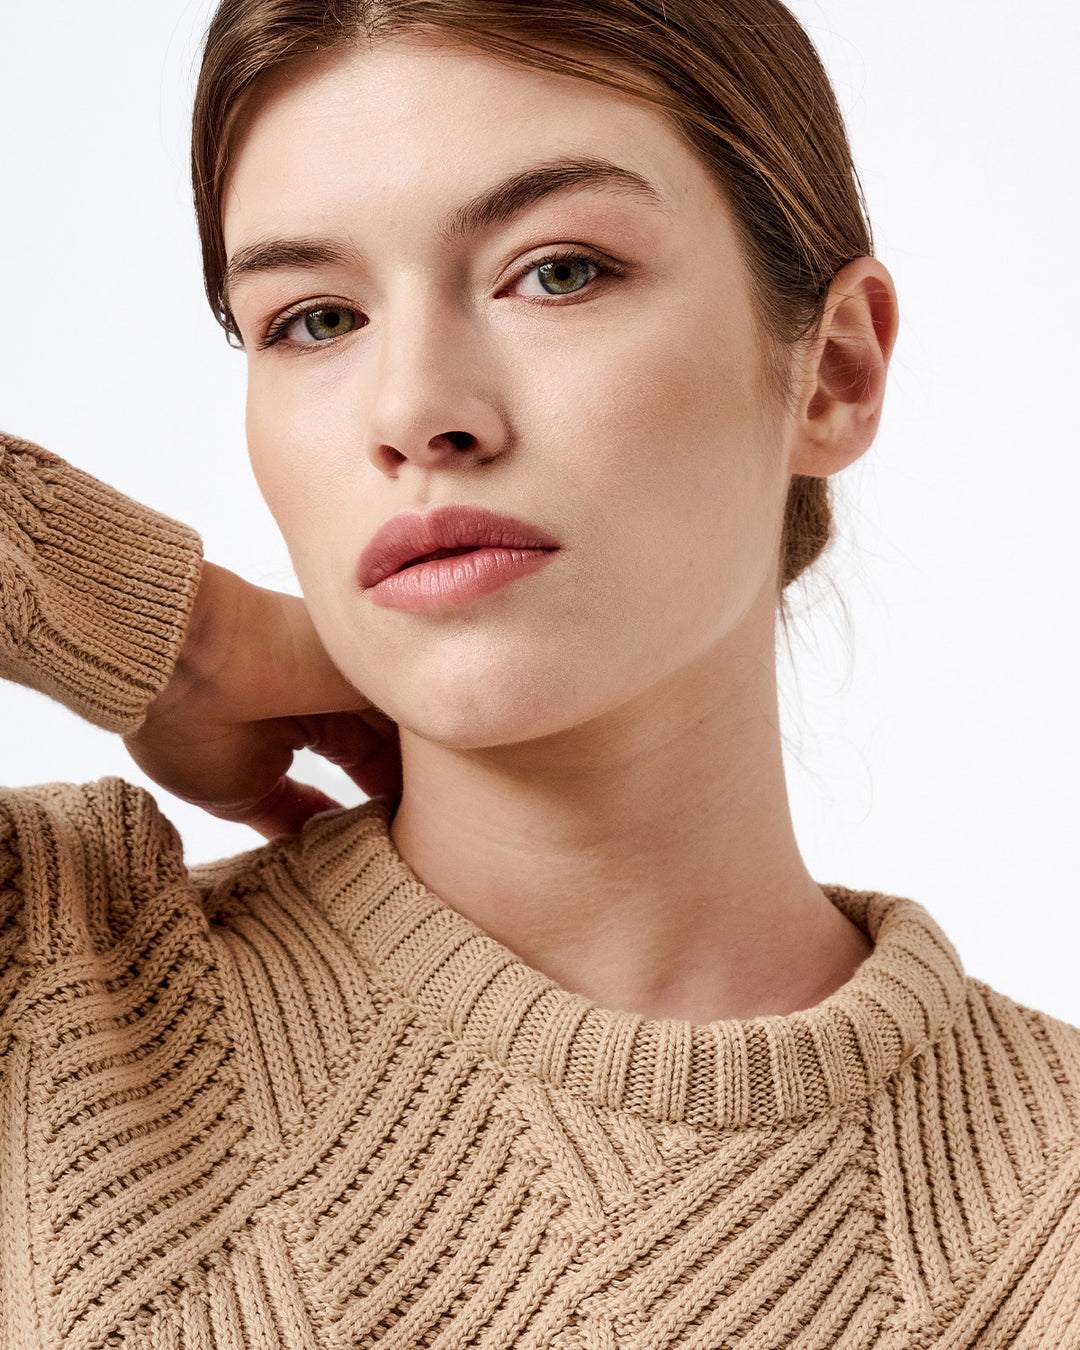 Behind the Scenes: Discover Our PETA-Approved Vegan Knitwear